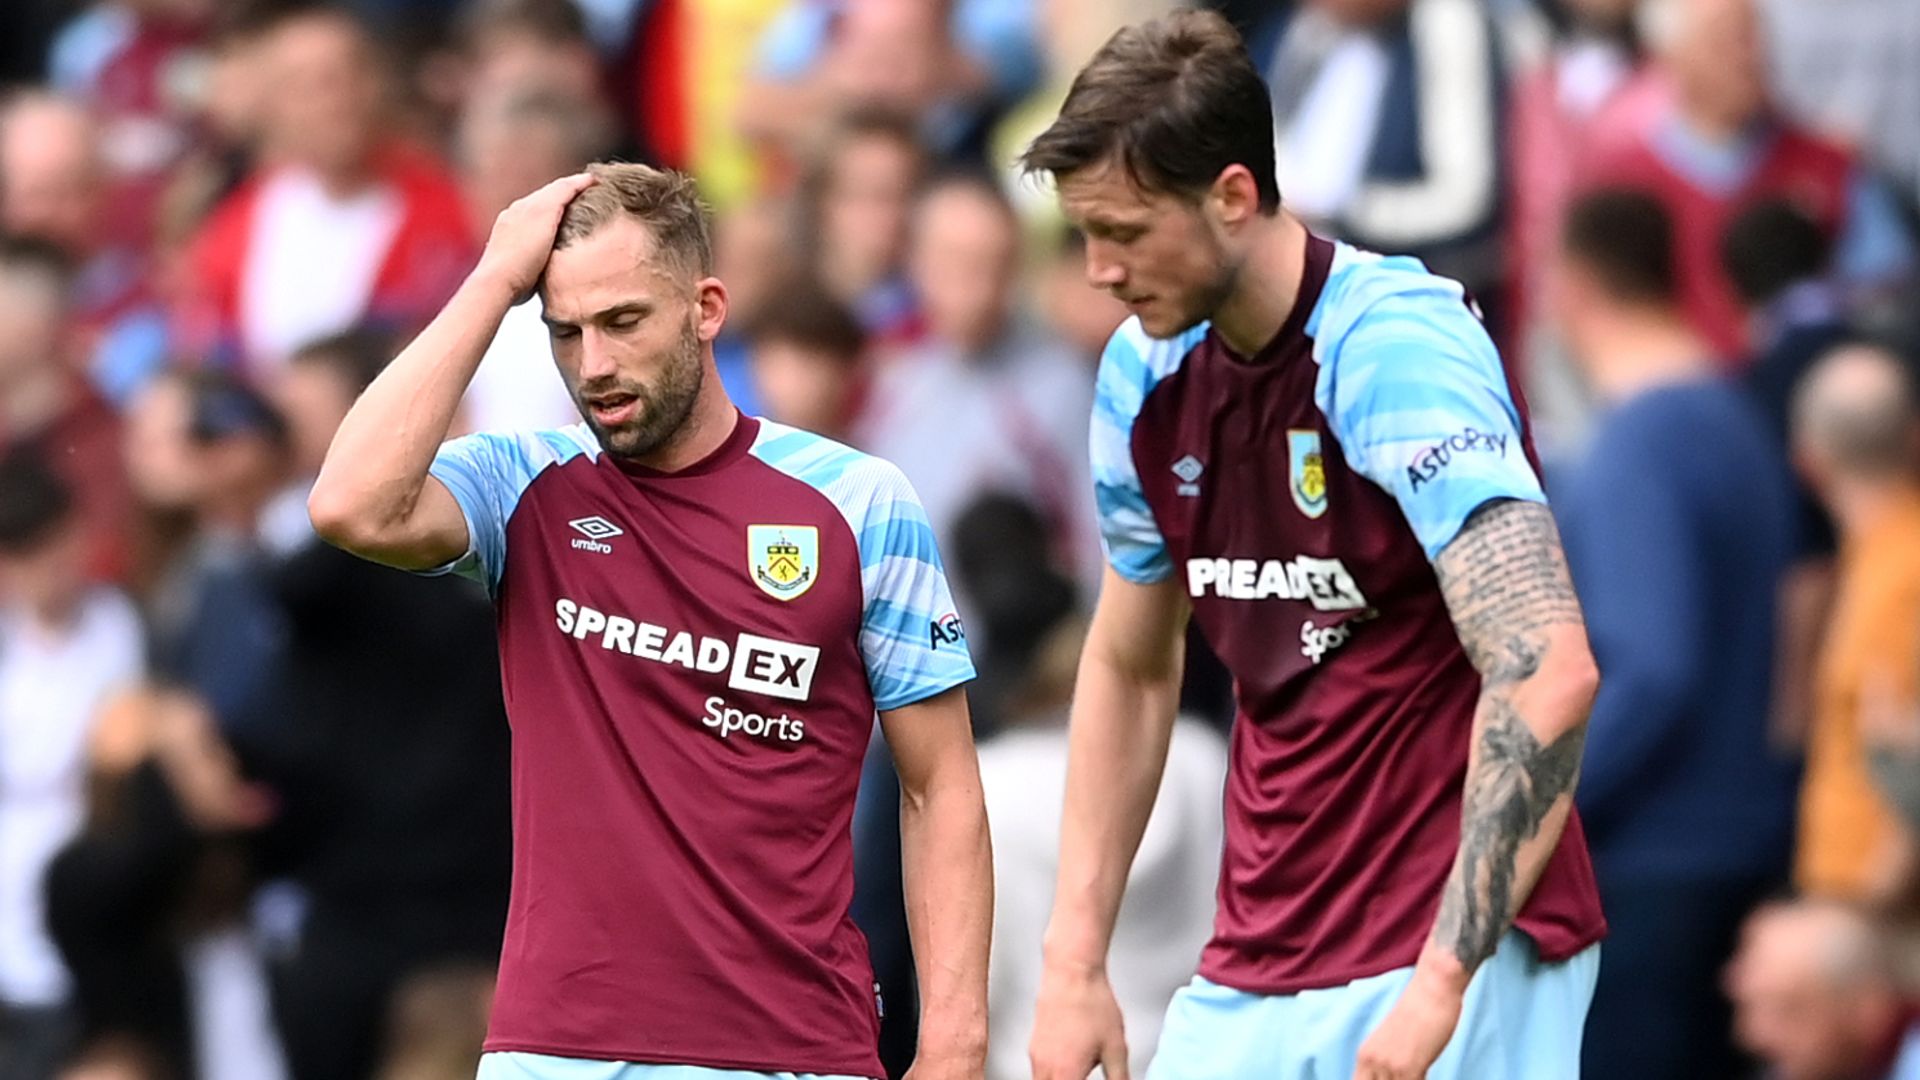 Burnley 1-2 Newcastle: Clarets relegated from Premier League after six seasons